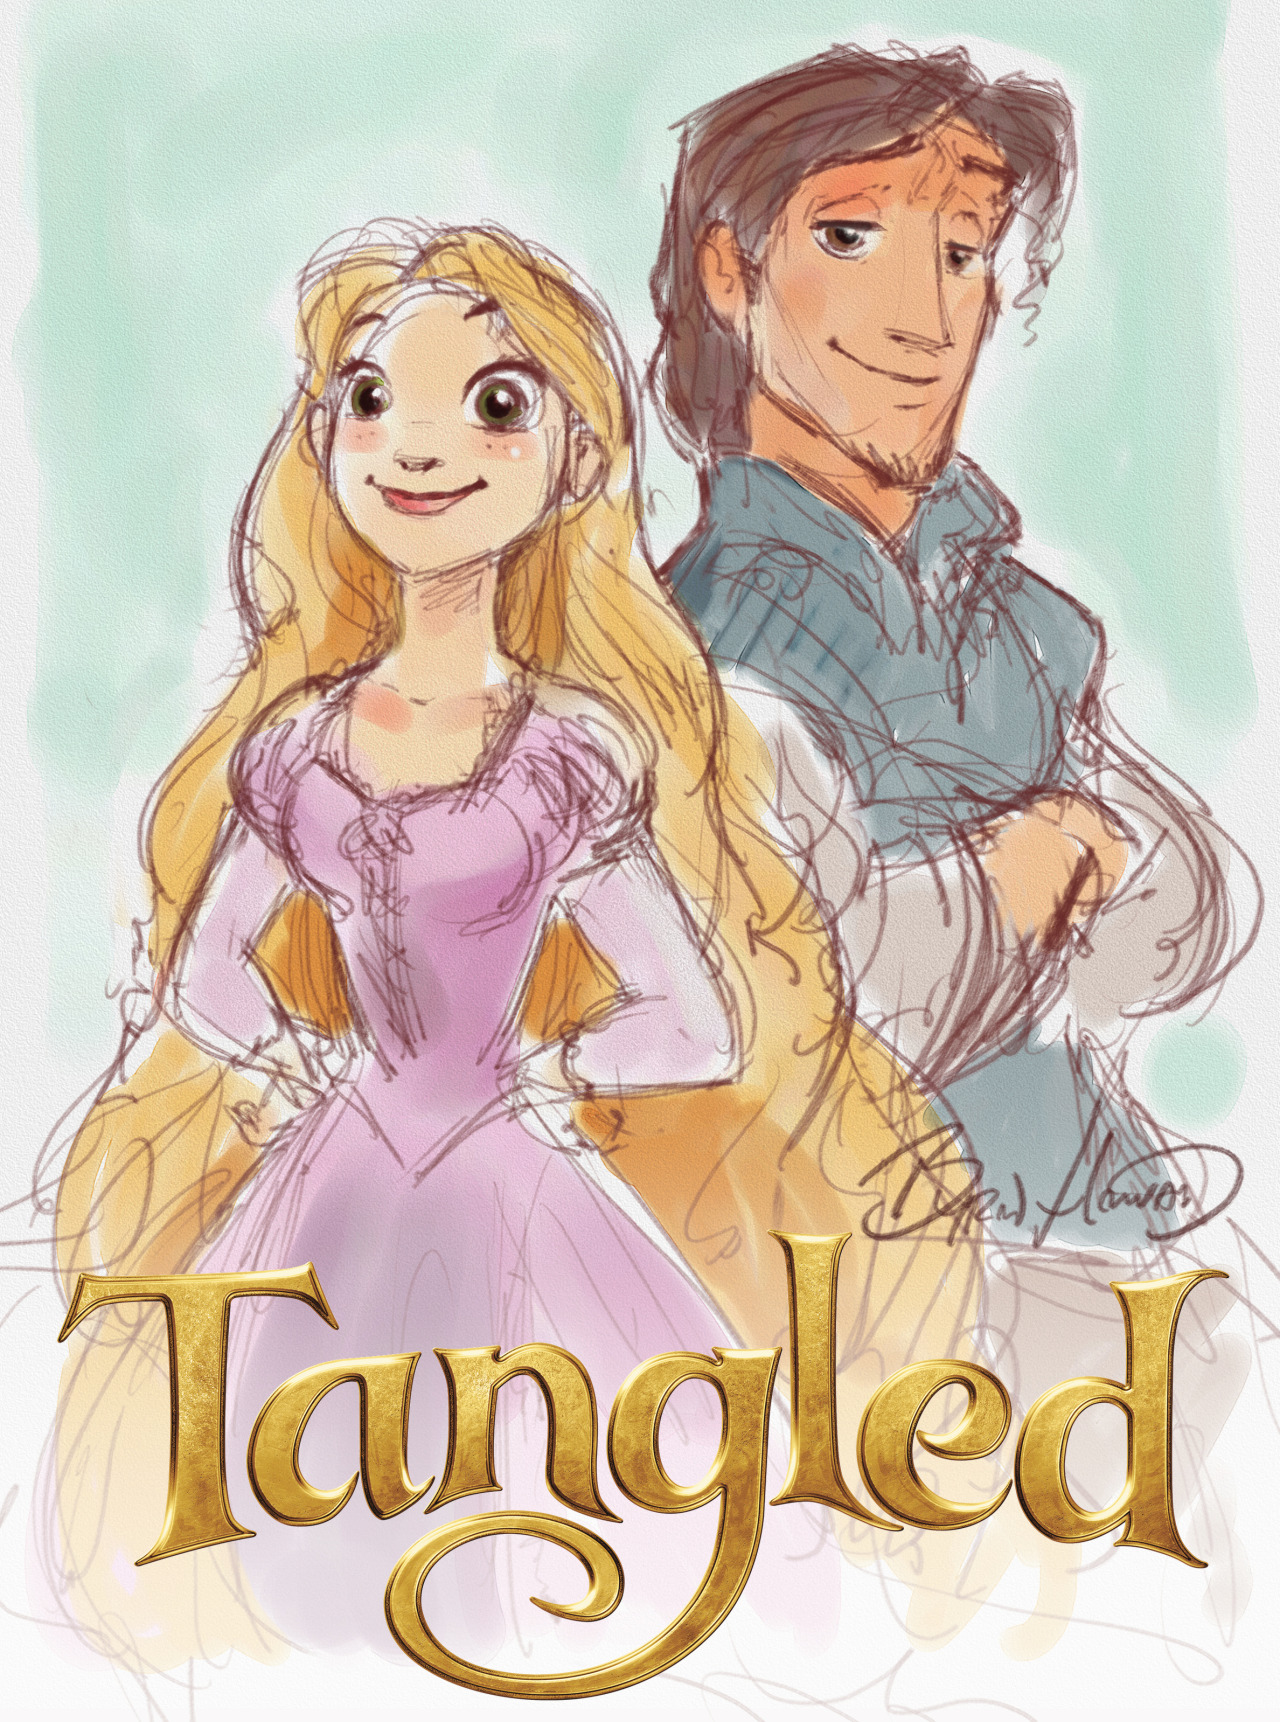 Tangled director, Byron Howard, celebrates the 5th anniversary of the film with a sketch that gleams and glows.